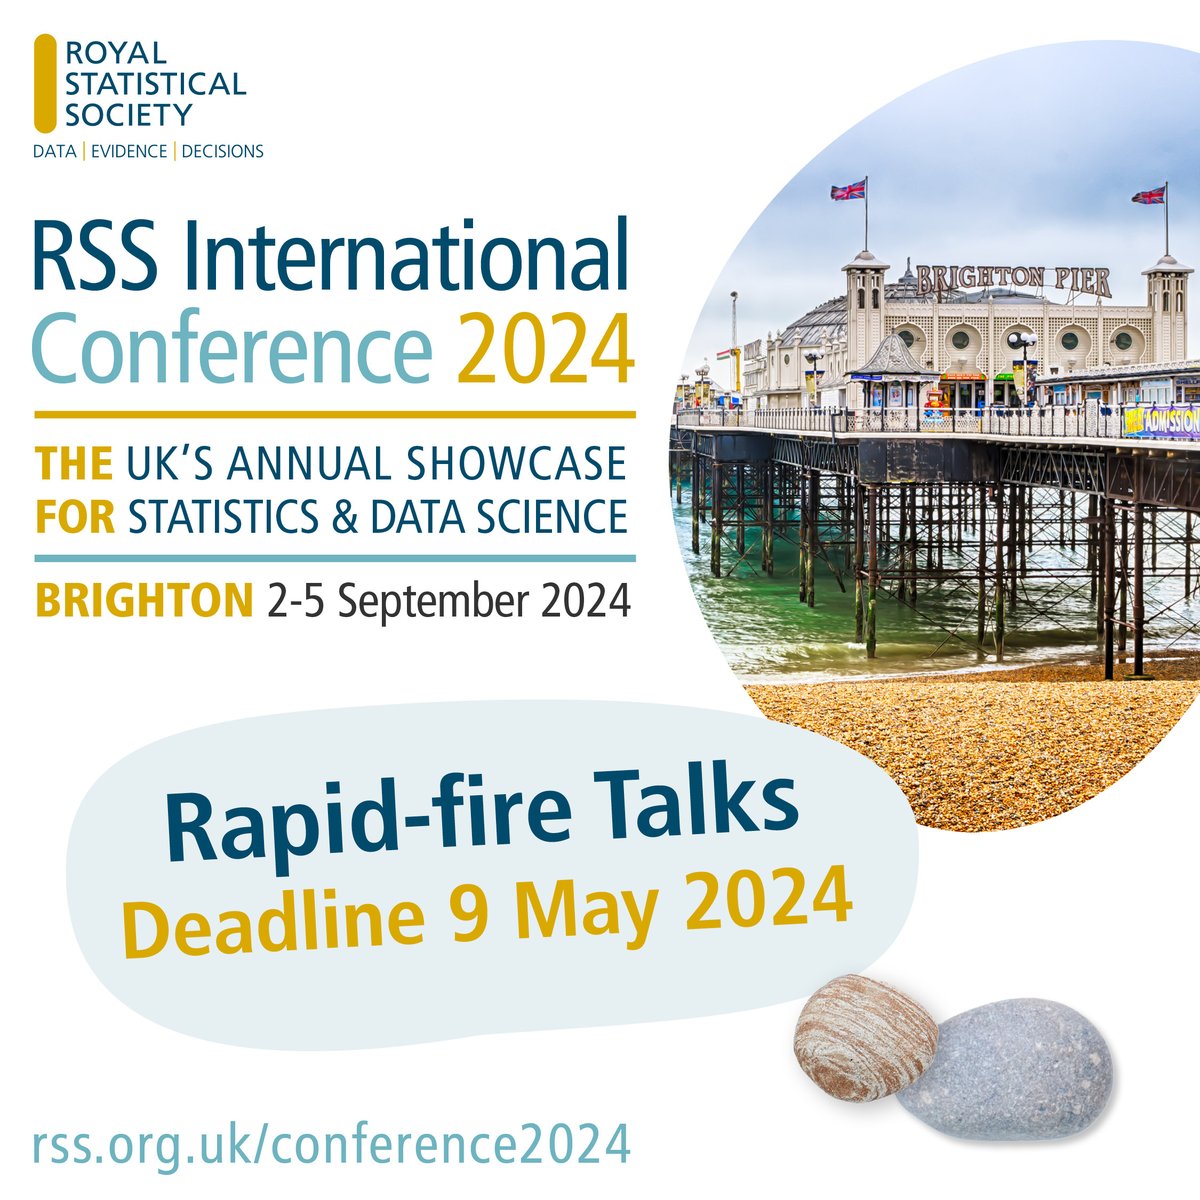 Still looking to present your research at @RoyalStatSoc 2024 International Conference in September? There are opportunities for both rapid-fire (5 minute) talks and poster presentations. Deadline for talk submissions is 9th May. Full details: rss.org.uk/training-event… #RSS2024Conf